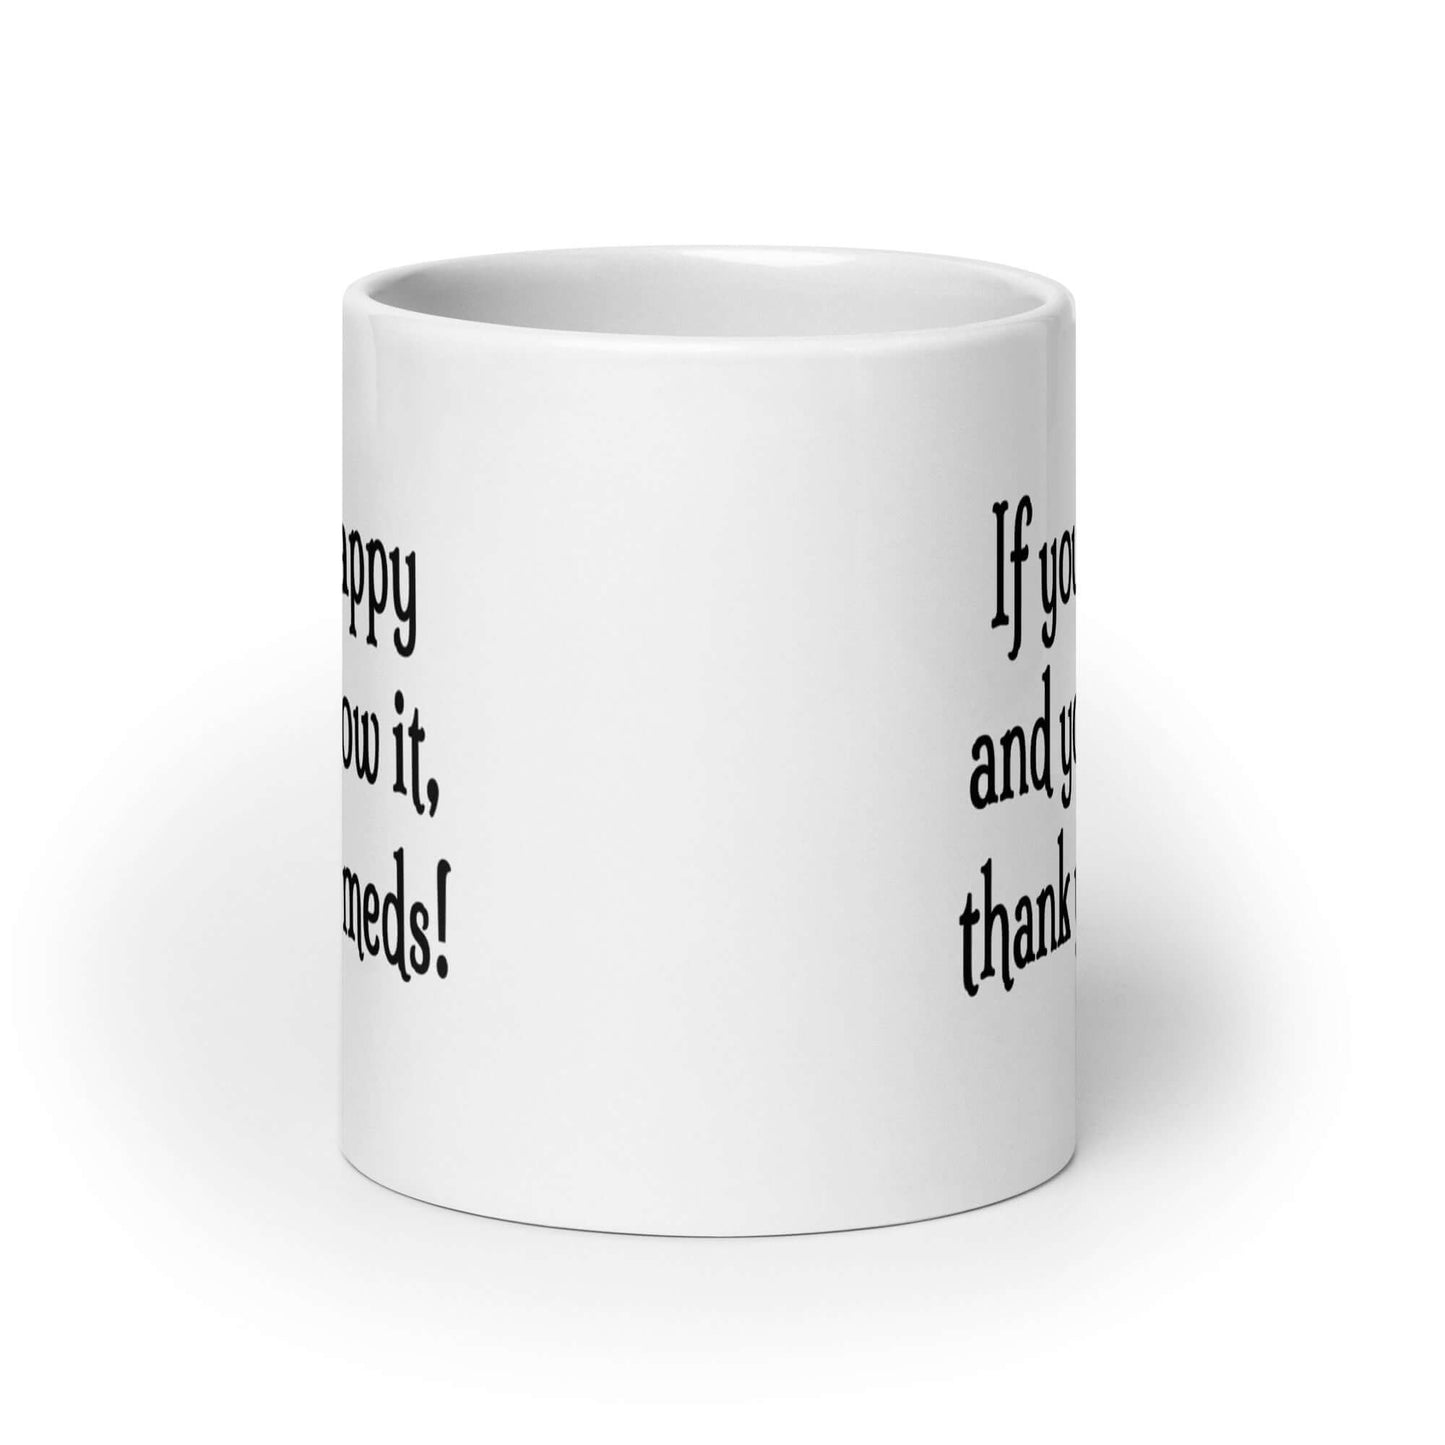 If you're happy and you know it thank your meds funny mug